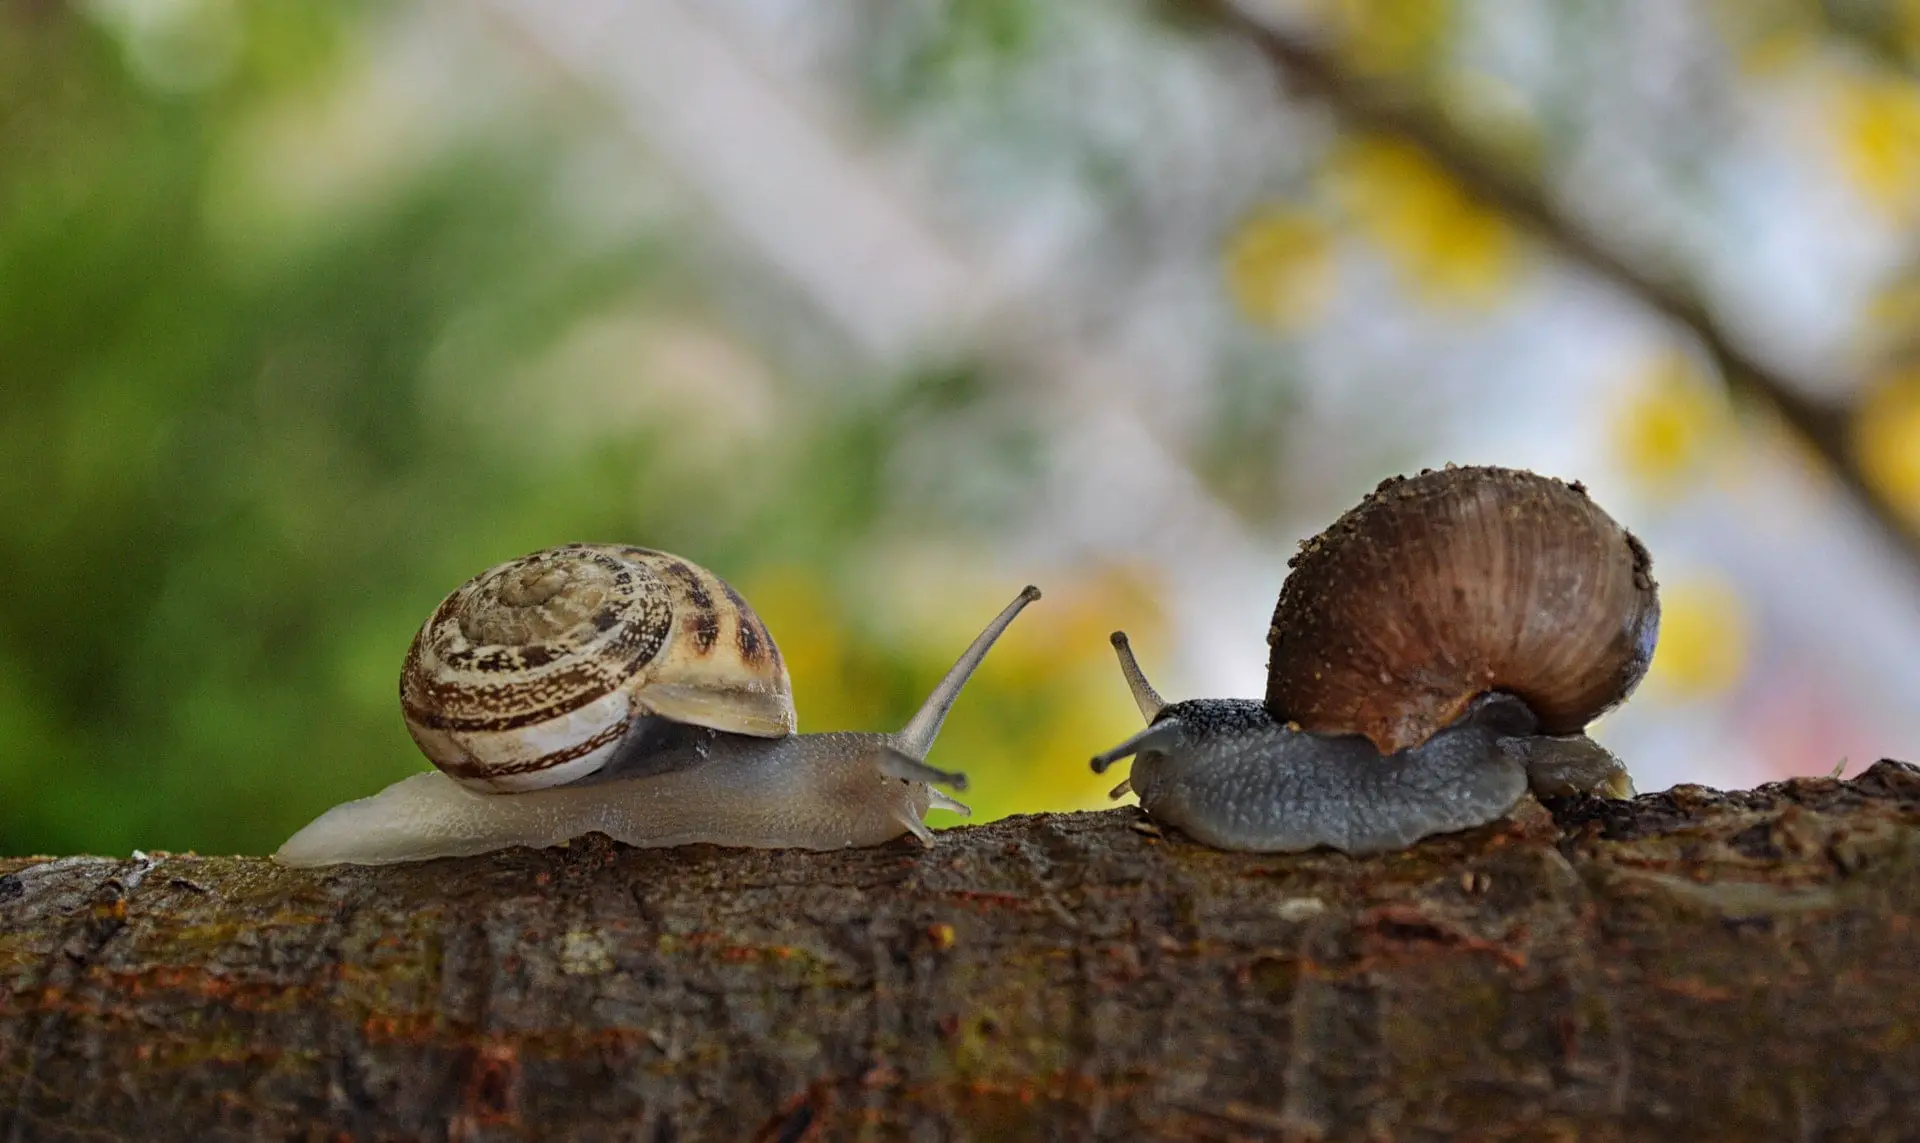 How many snails are eaten in France each year?